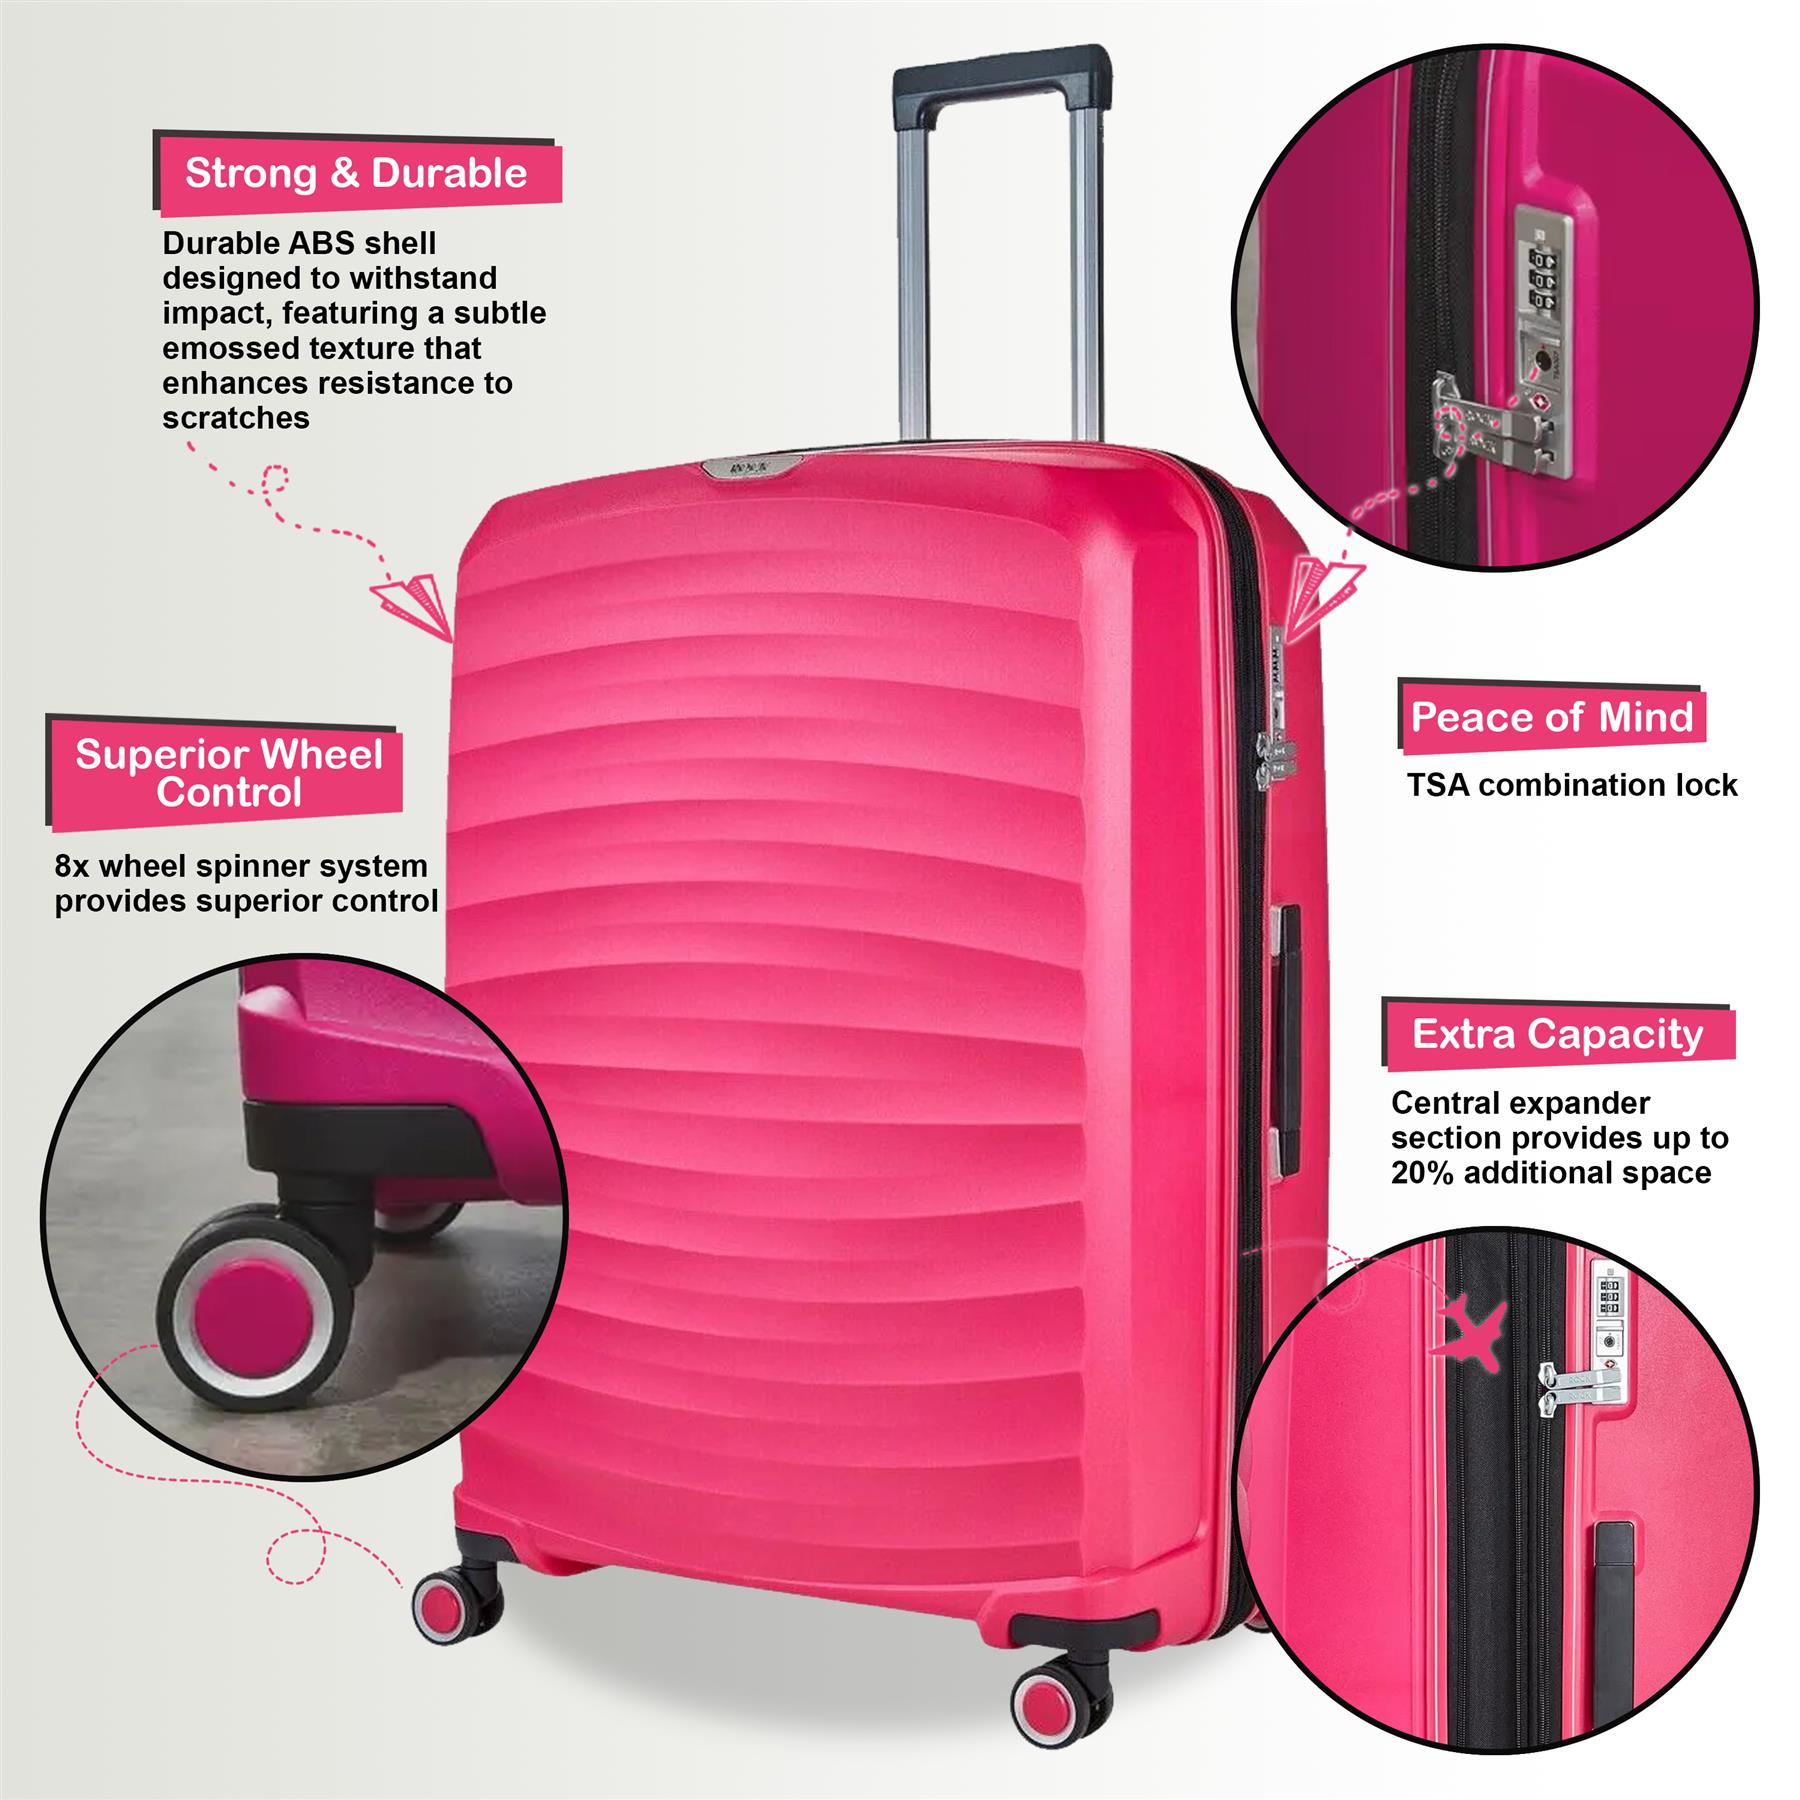 Altoona Set of 3 Hard Shell Suitcase in Pink